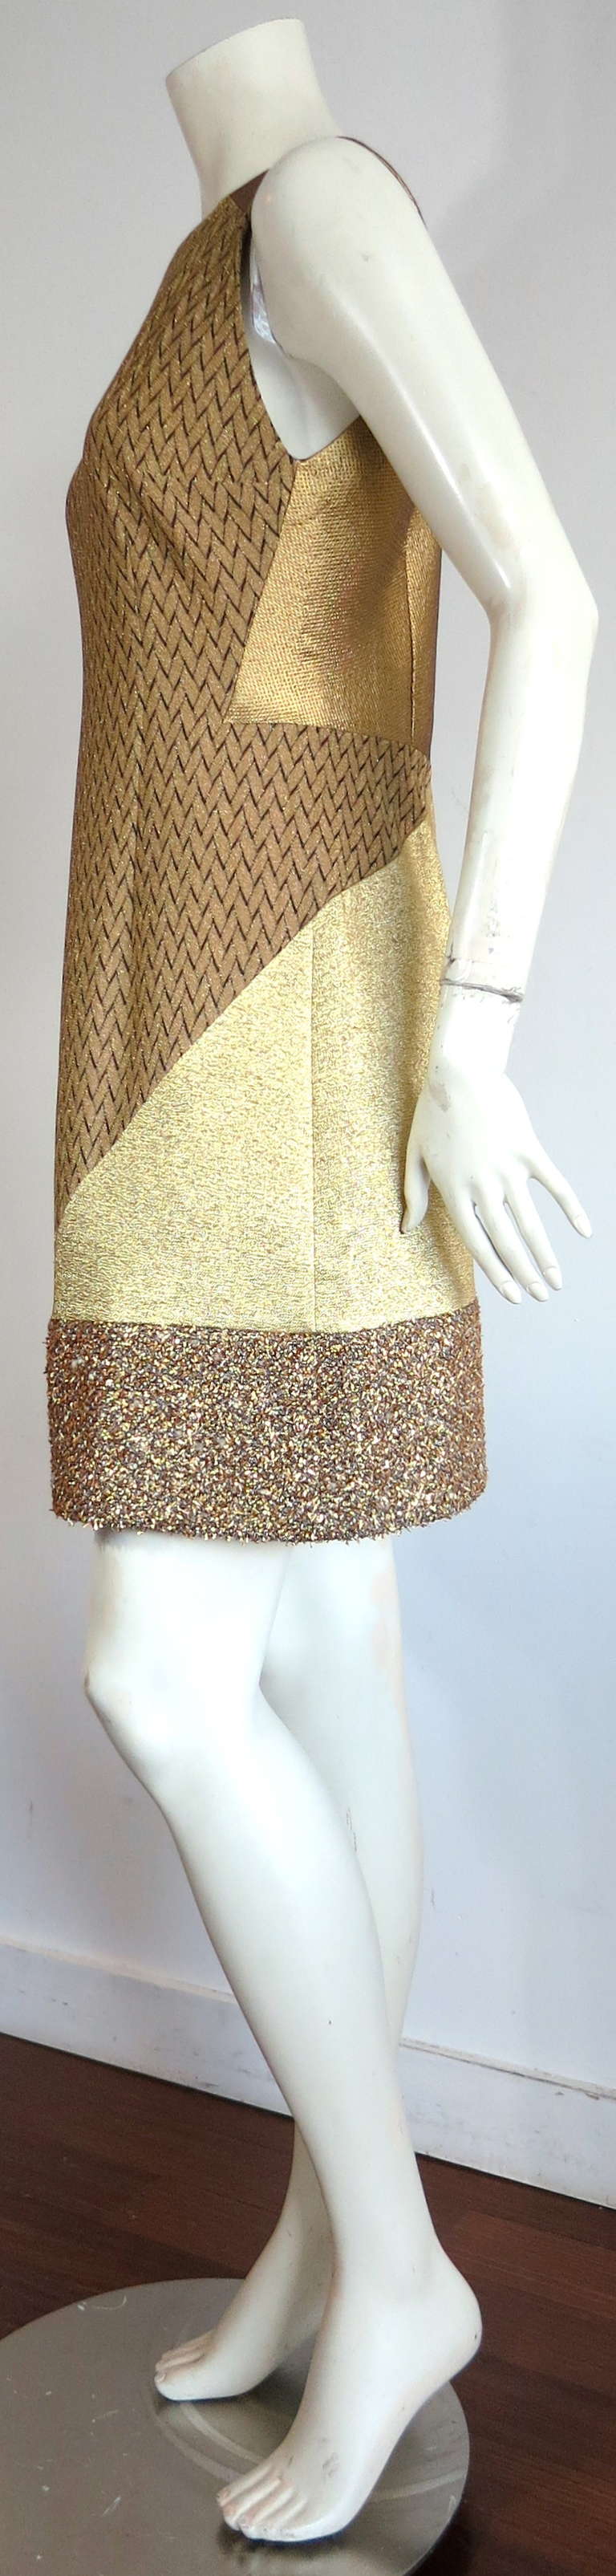 New MISSONI ITALY Metallic gold patchwork cocktail dress 4